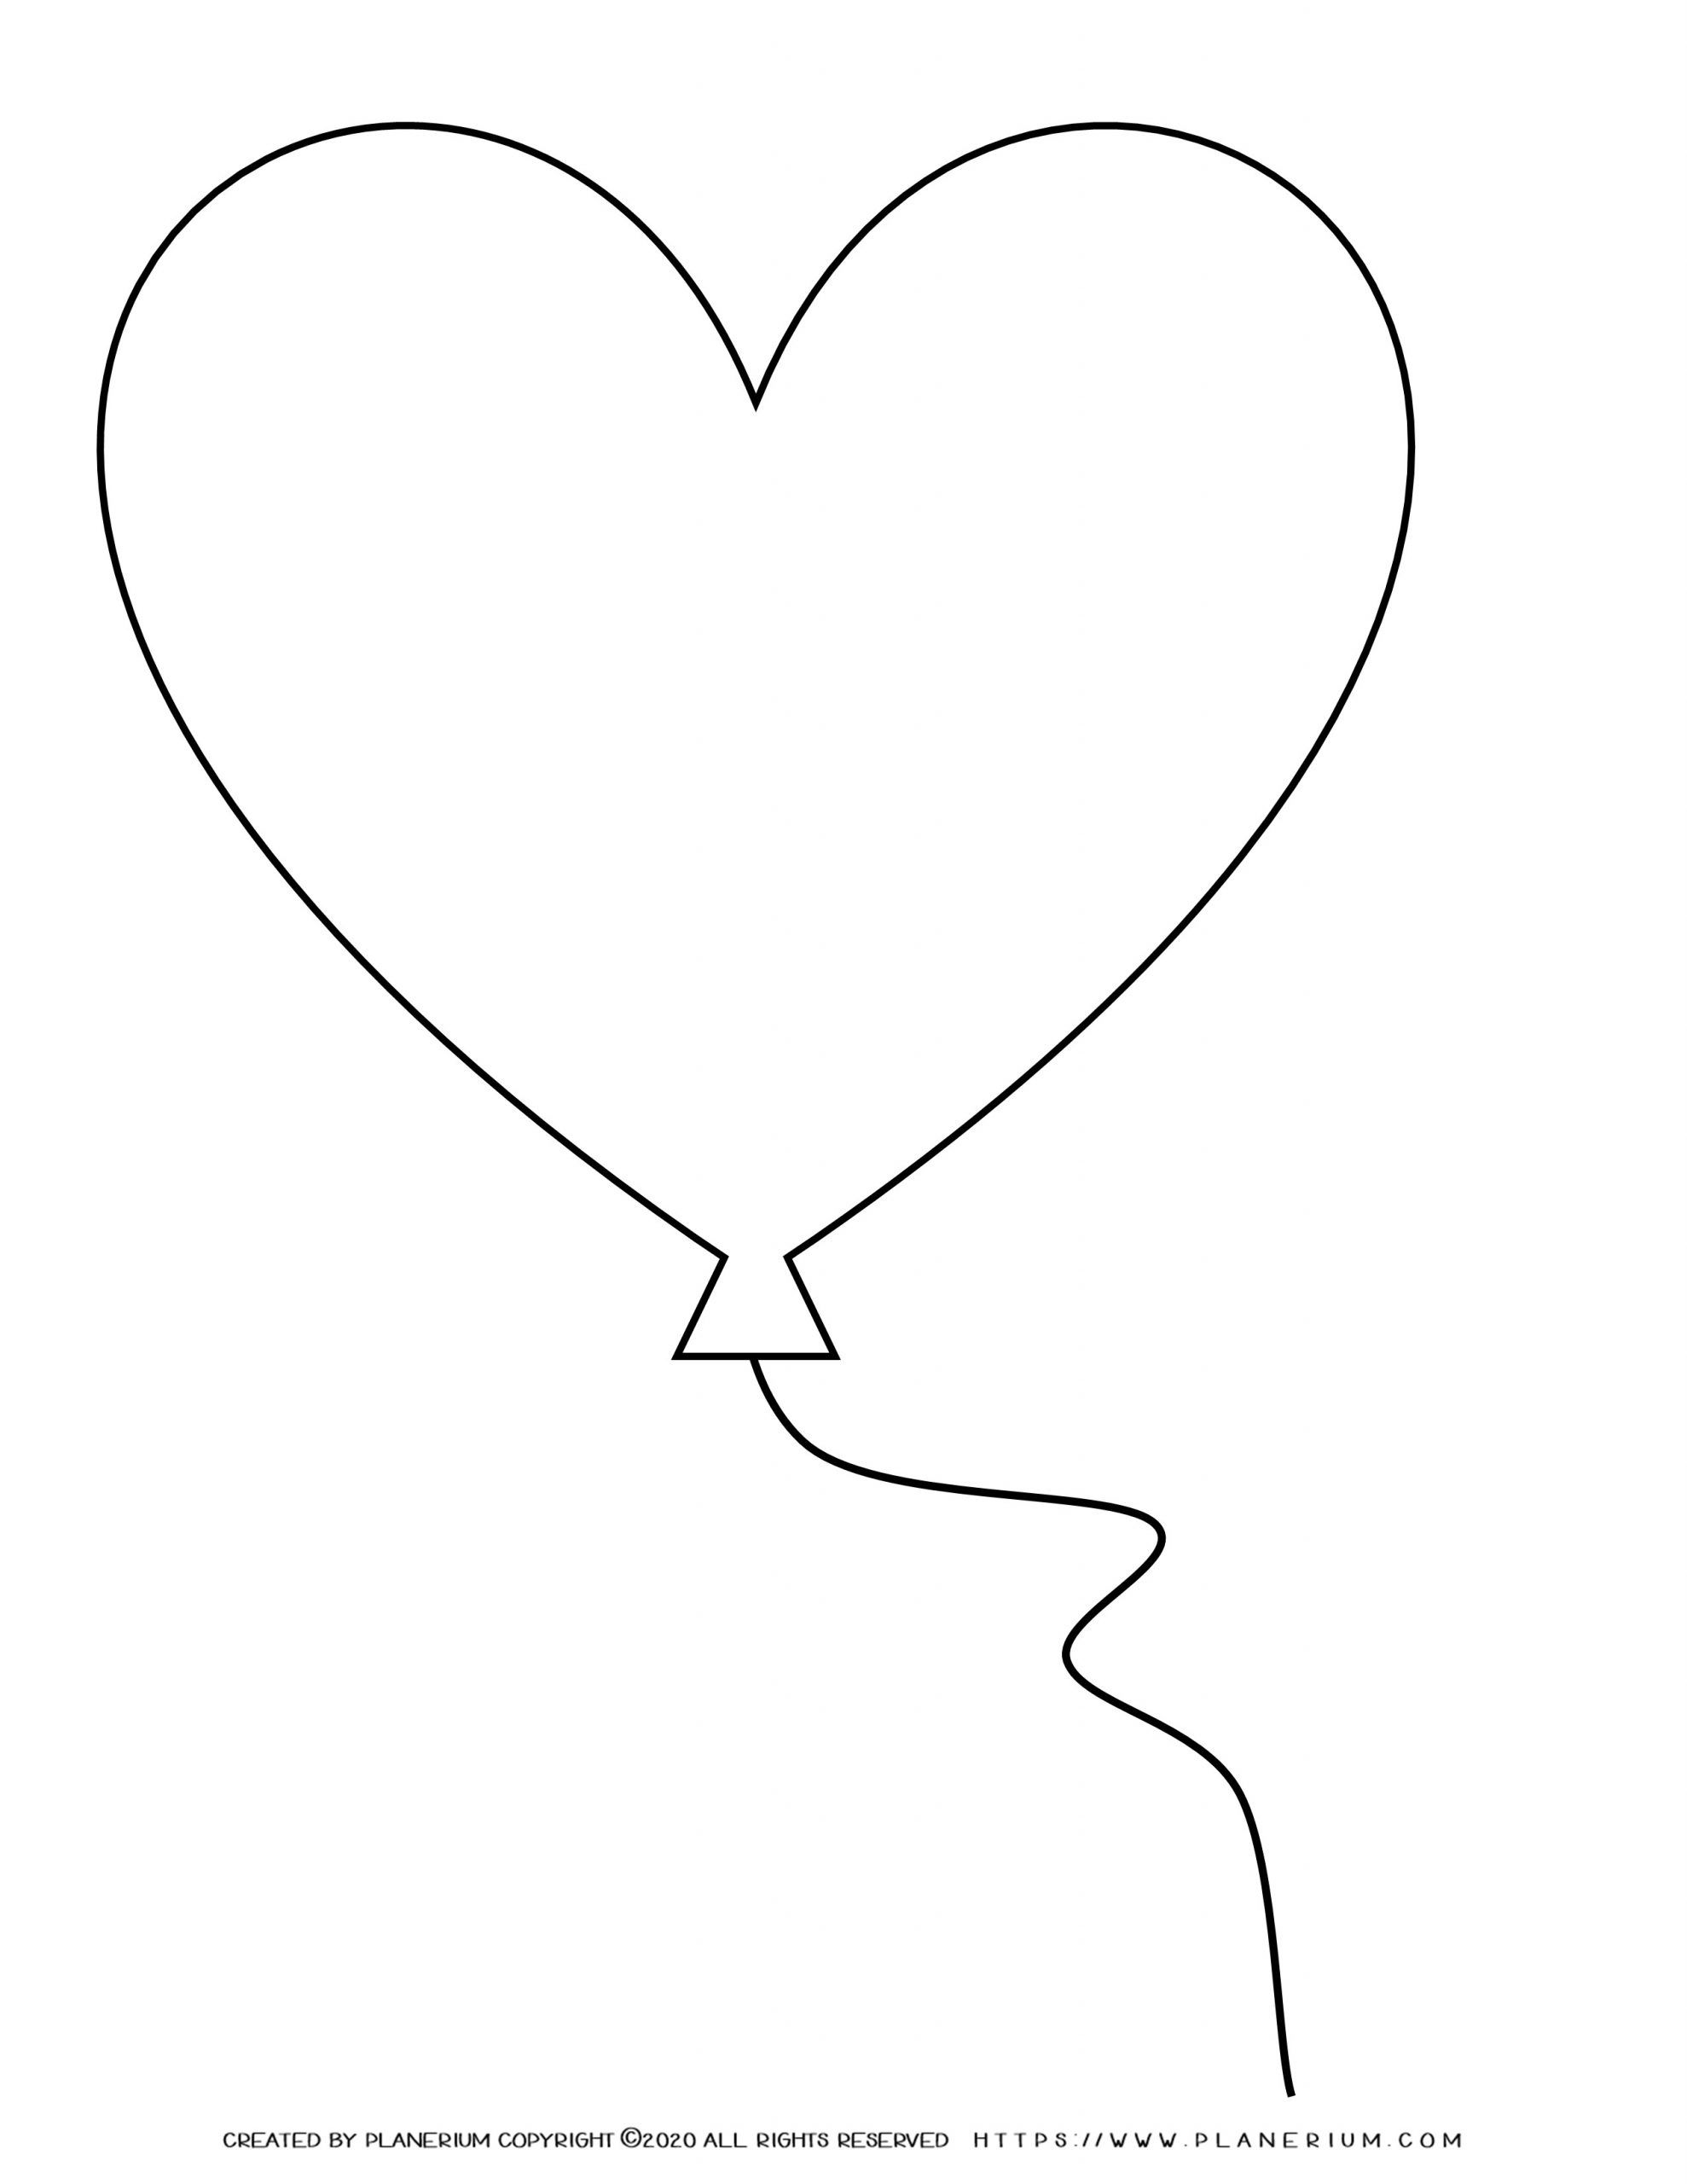 Mother's day - Coloring Page - Big Heart Balloon | Planerium